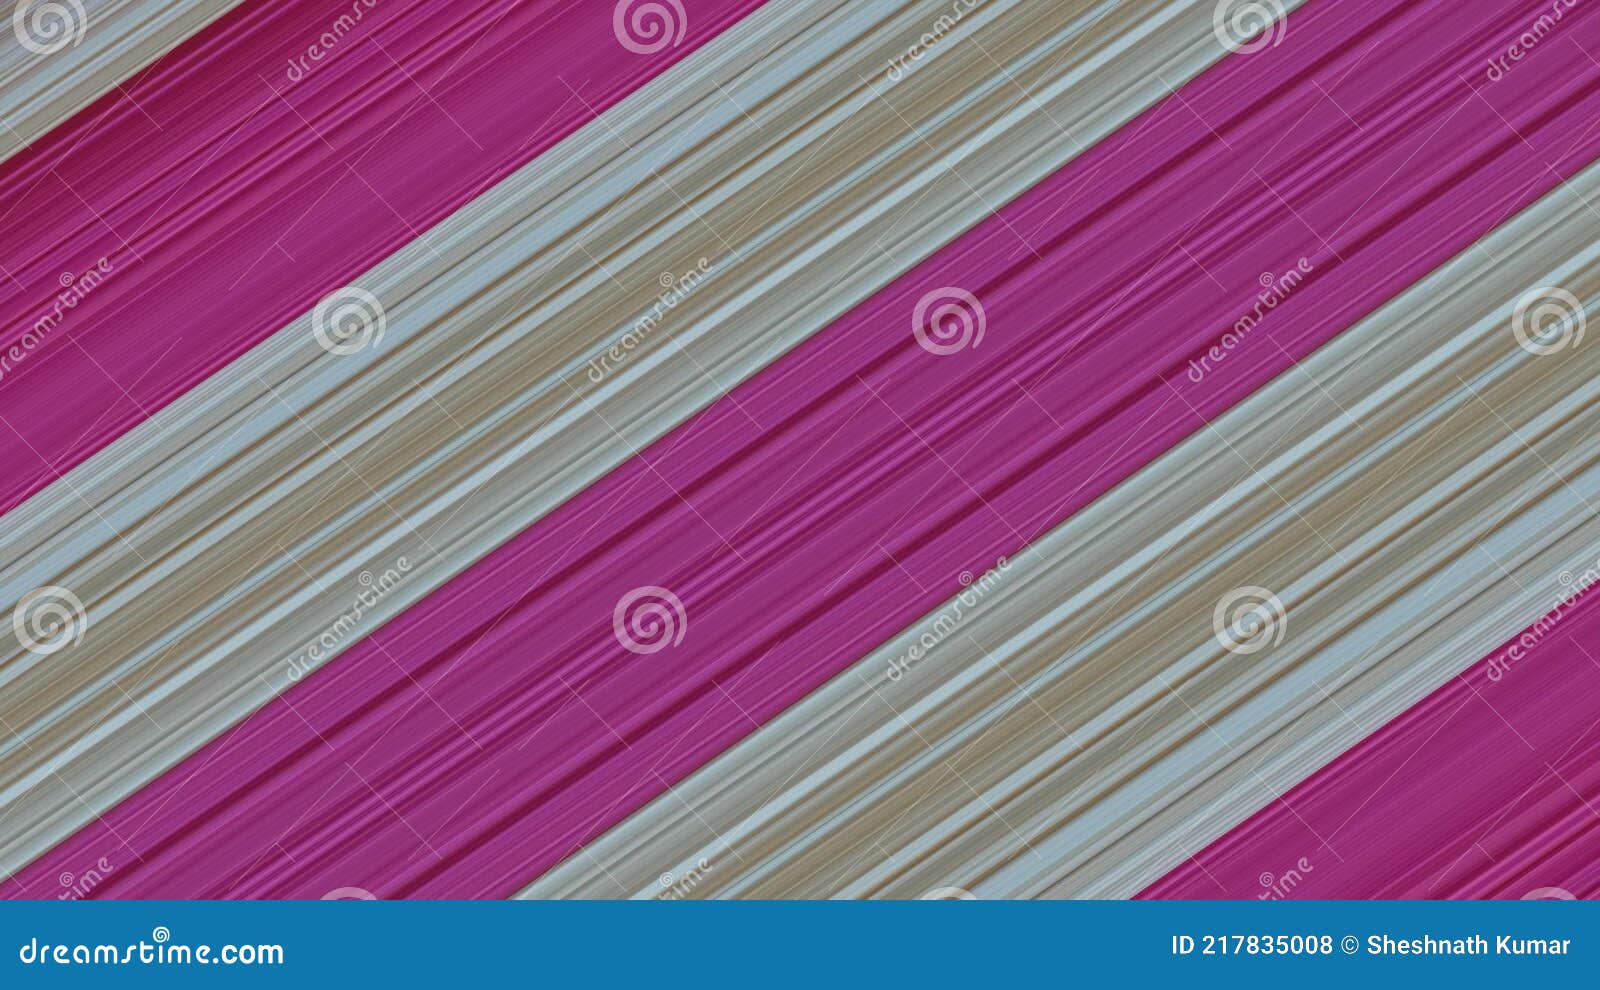 https://thumbs.dreamstime.com/z/texture-graphic-colorfully-design-background-wallpaper-contact-phone-number-nepal-217835008.jpg